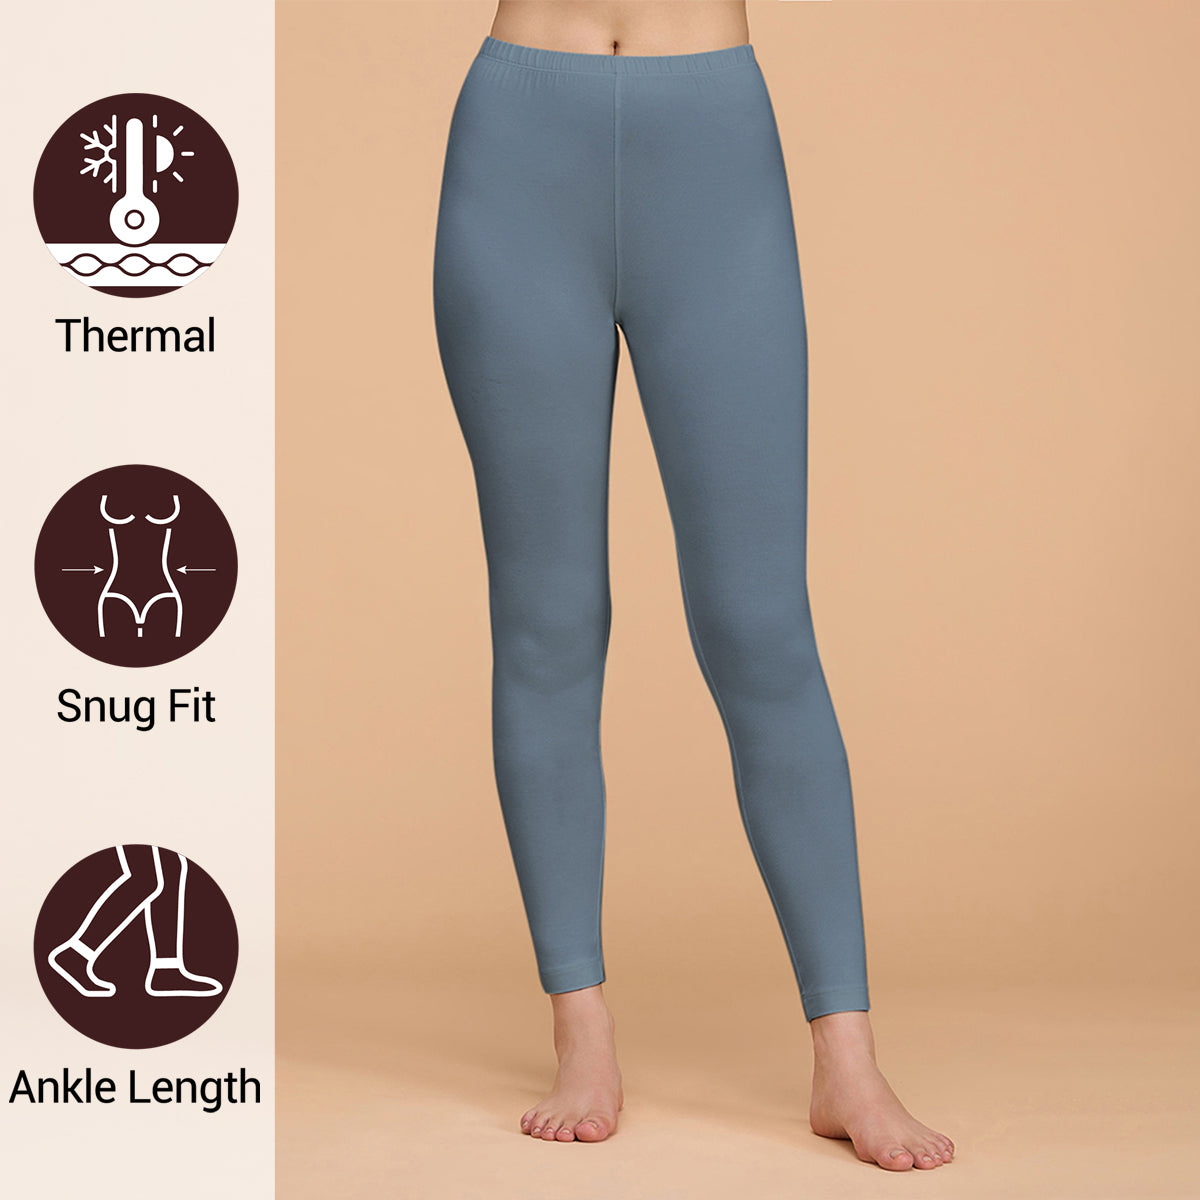 Ultra Light and Soft Thermal Leggings that stay hidden under clothes-NYOE06 Grey